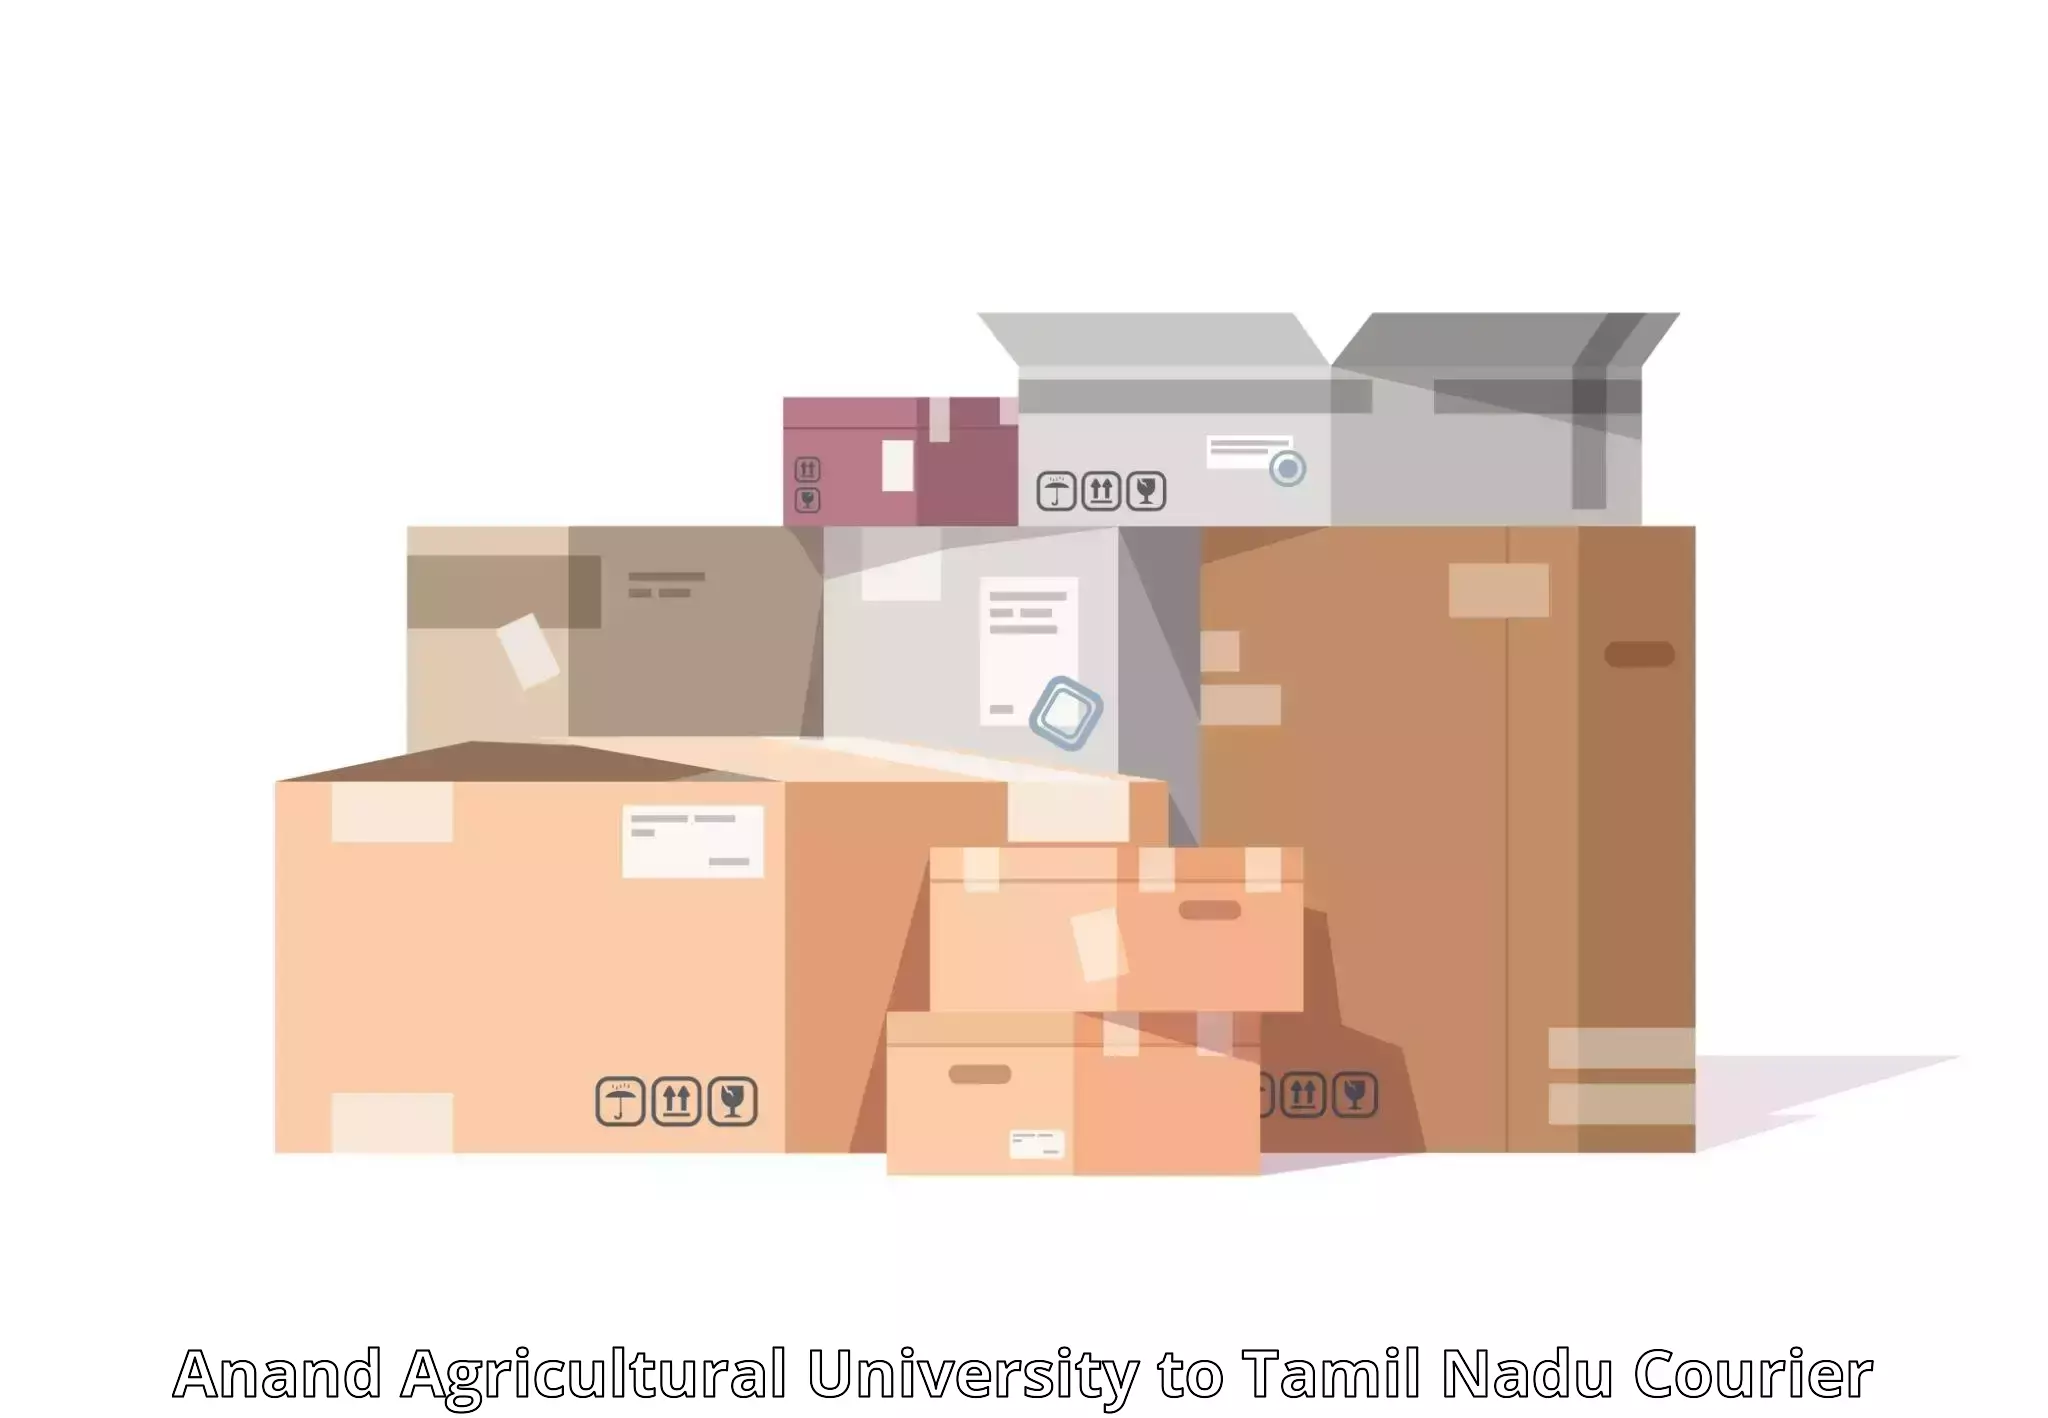 Long distance courier Anand Agricultural University to Manamadurai